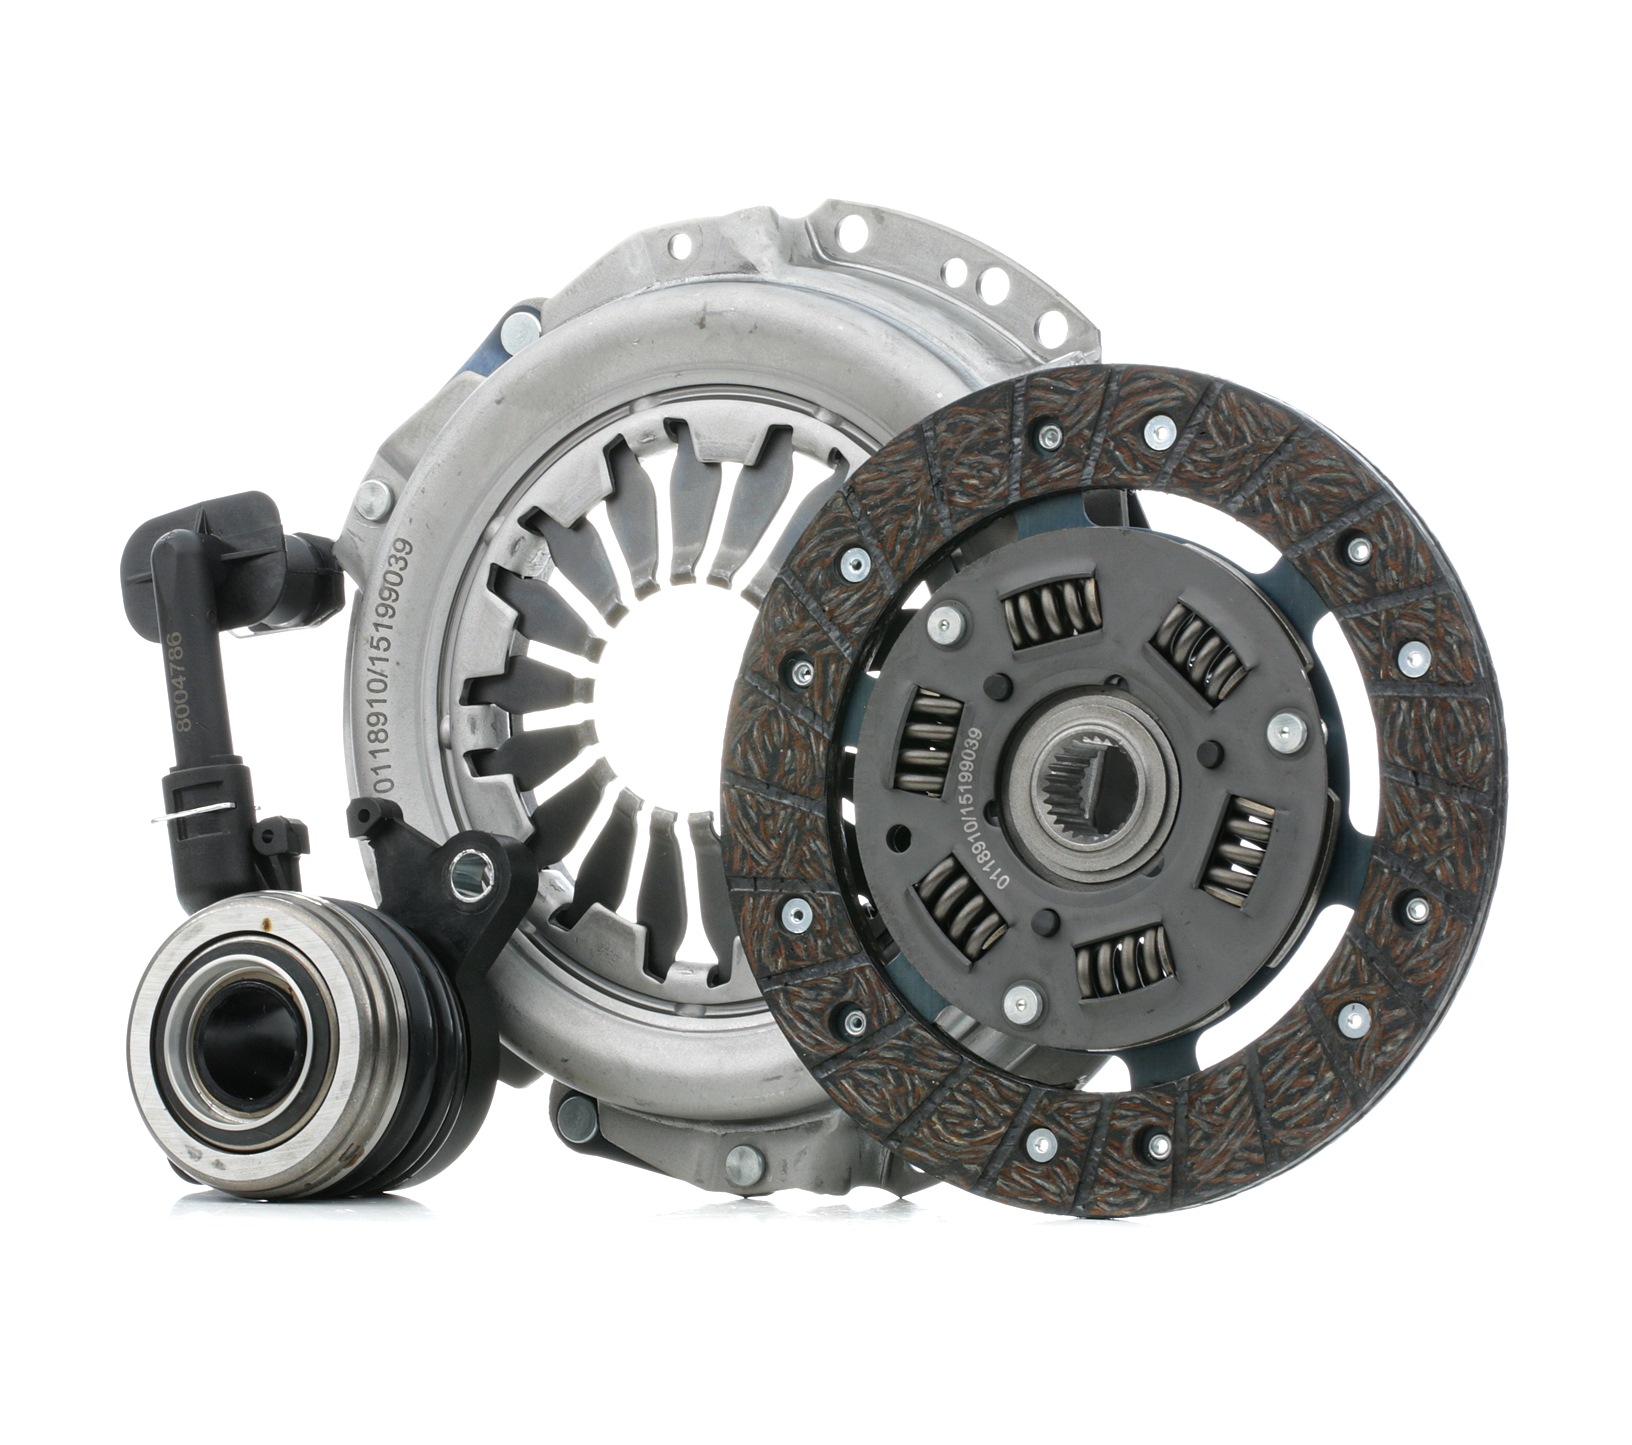 SKCK-0100276 STARK Clutch set DACIA three-piece, with clutch pressure plate, with central slave cylinder, with clutch disc, 180mm